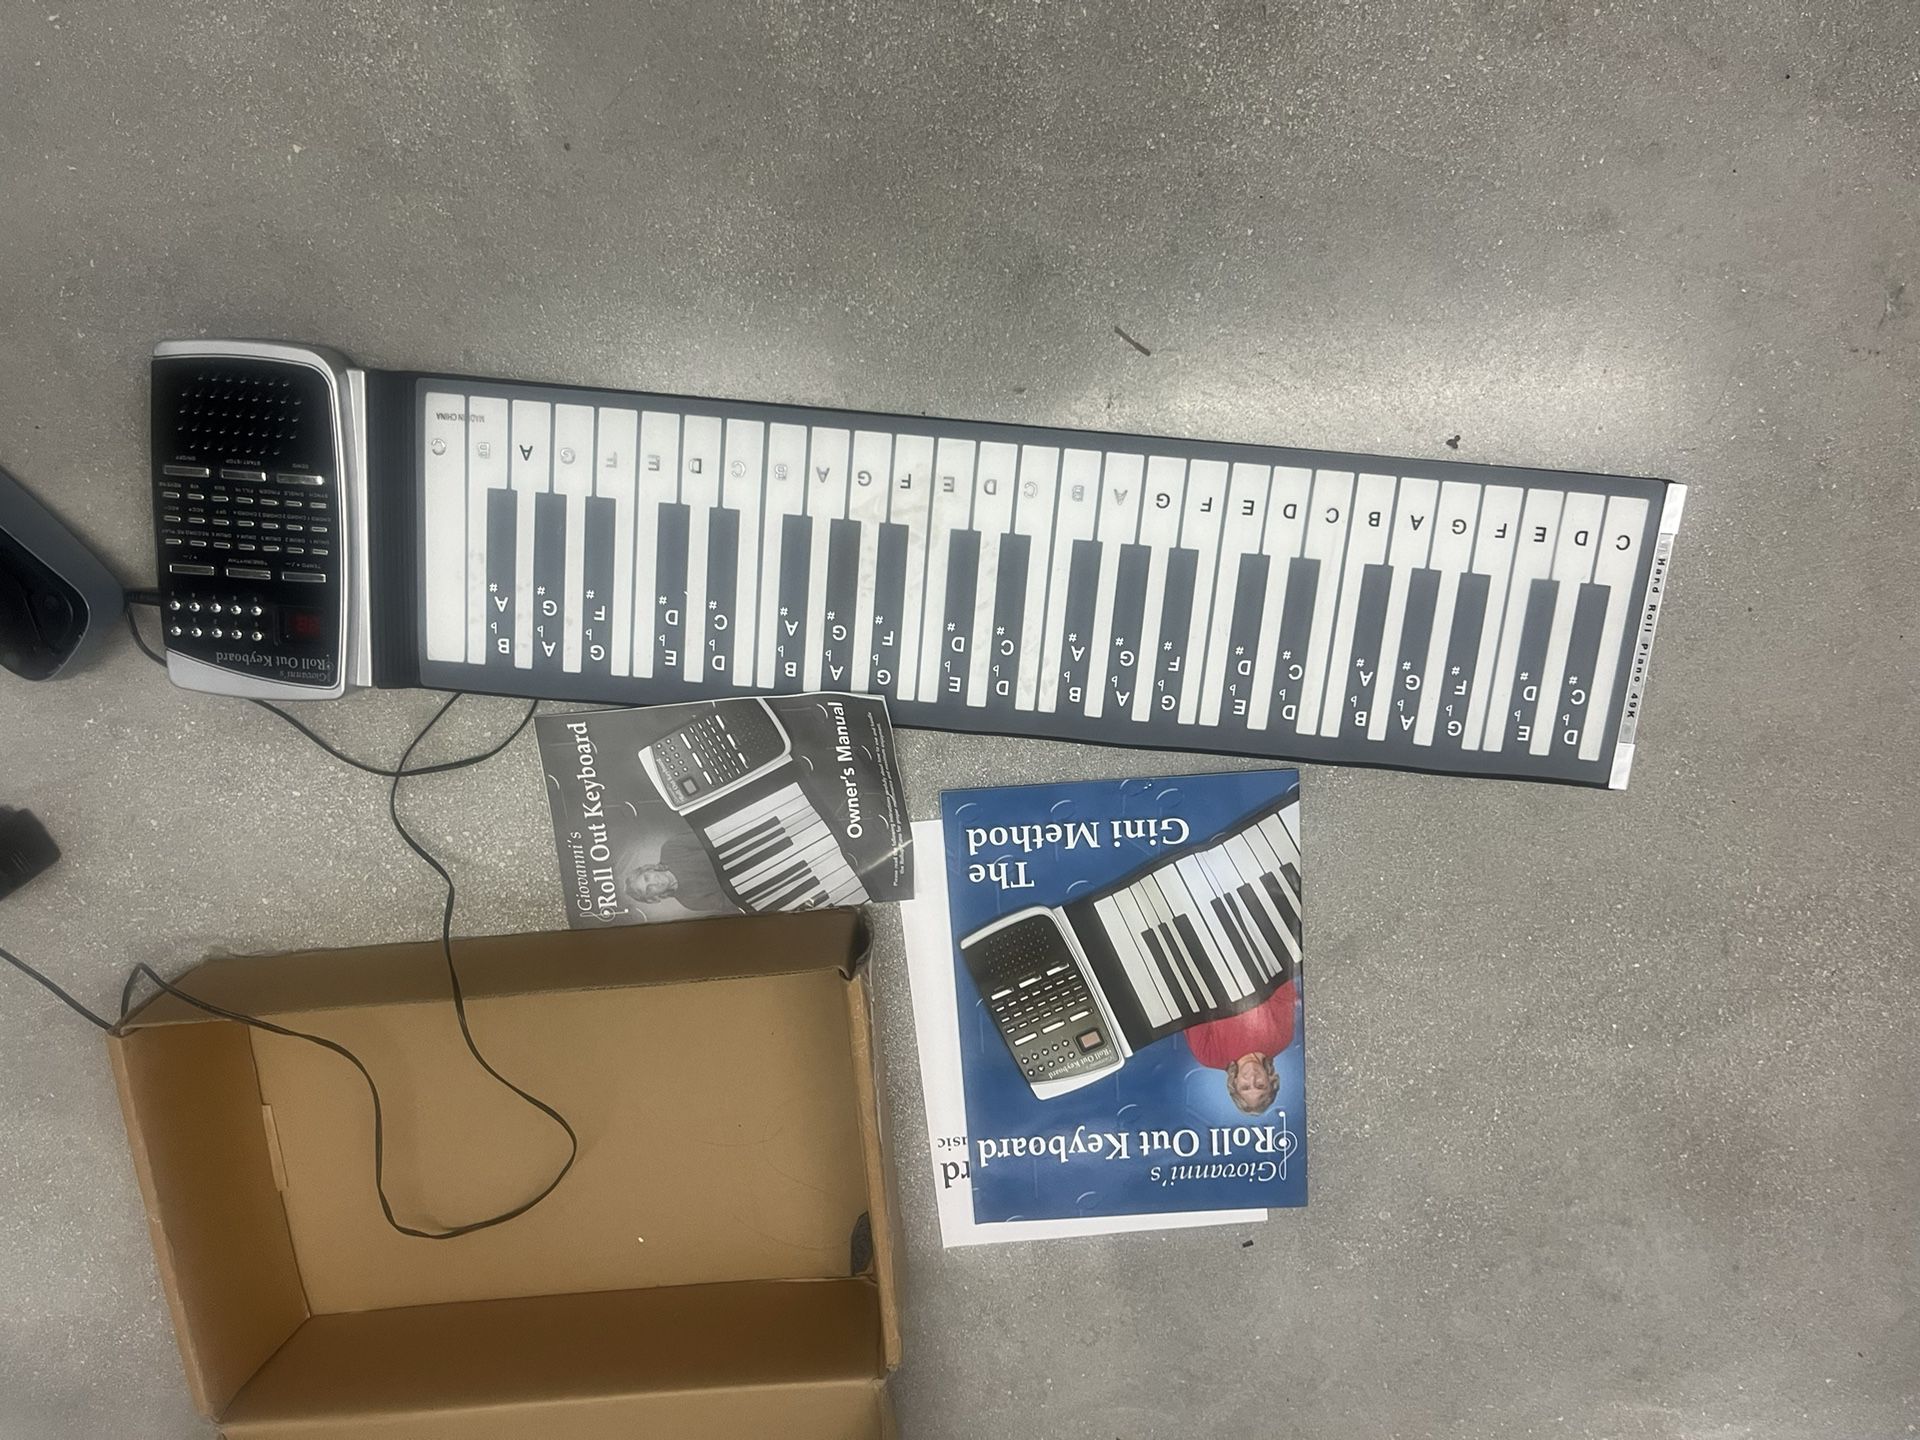 Giovanni Piano DLX Method with Roll Out Keyboard